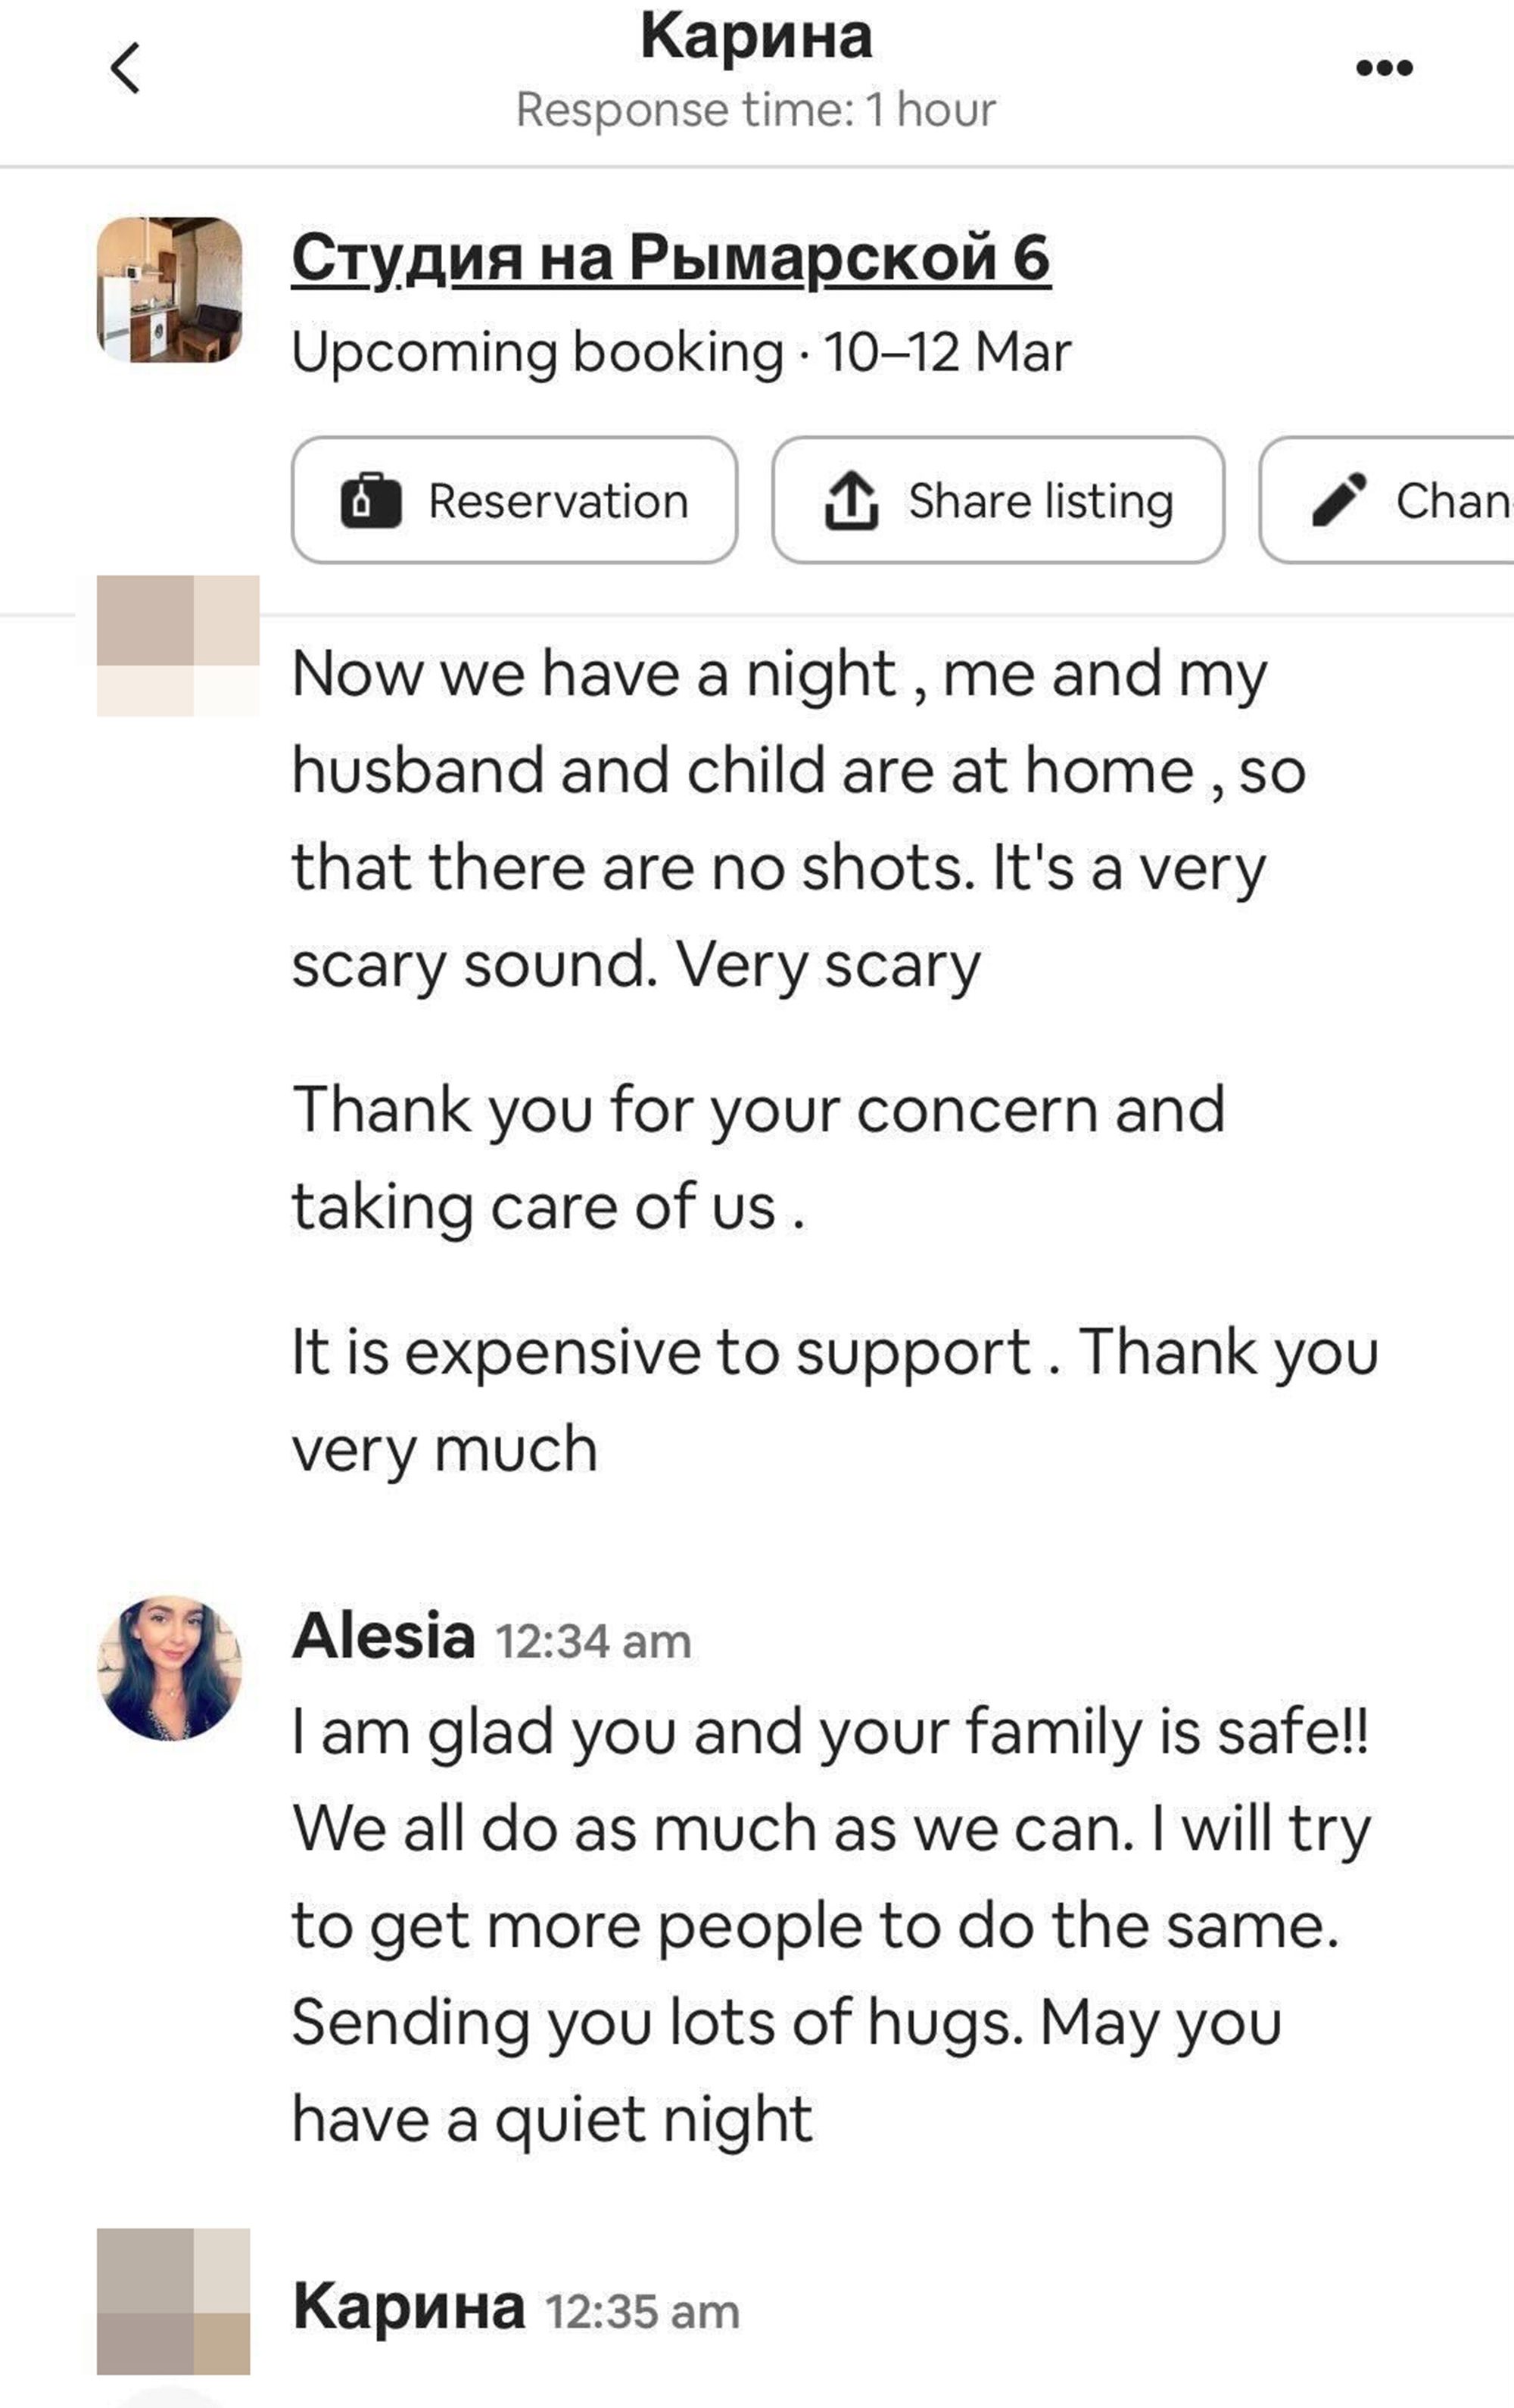 A conversation between Karina and Alicia who booked an Airbnb.